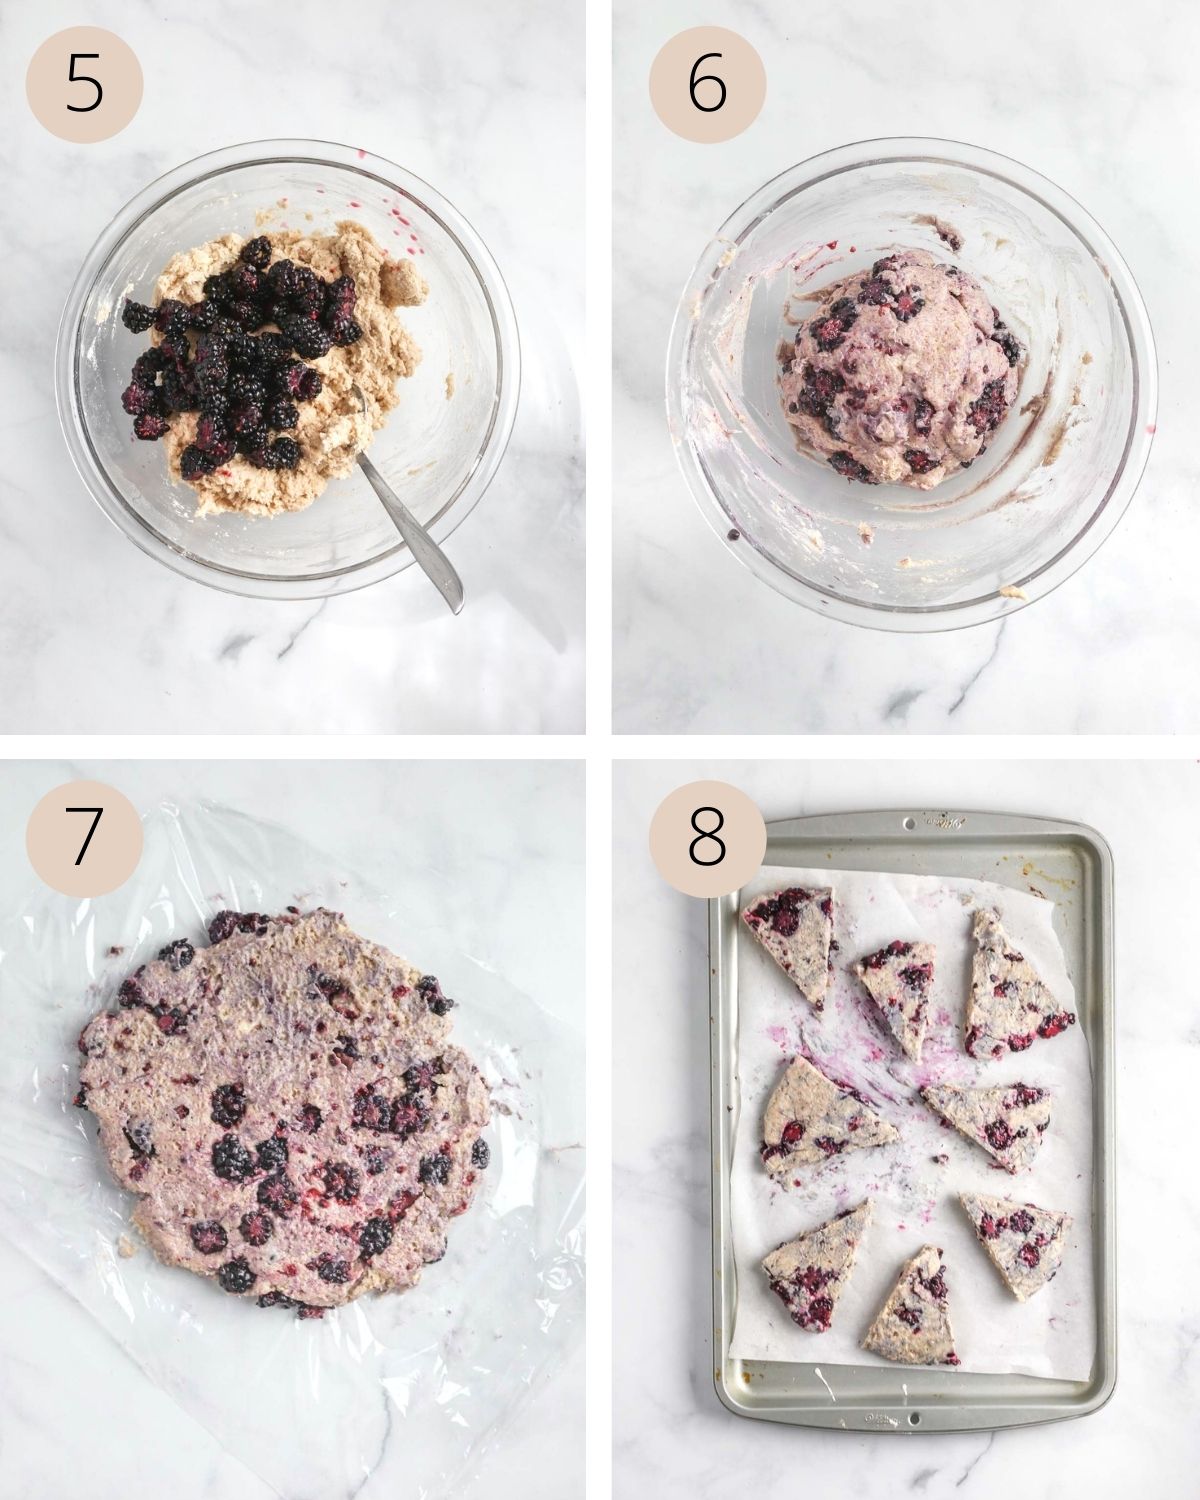 a collage of four images showing how to fold in the blackberries, roll the dough into a ball, and slice the dough into triangular scones.